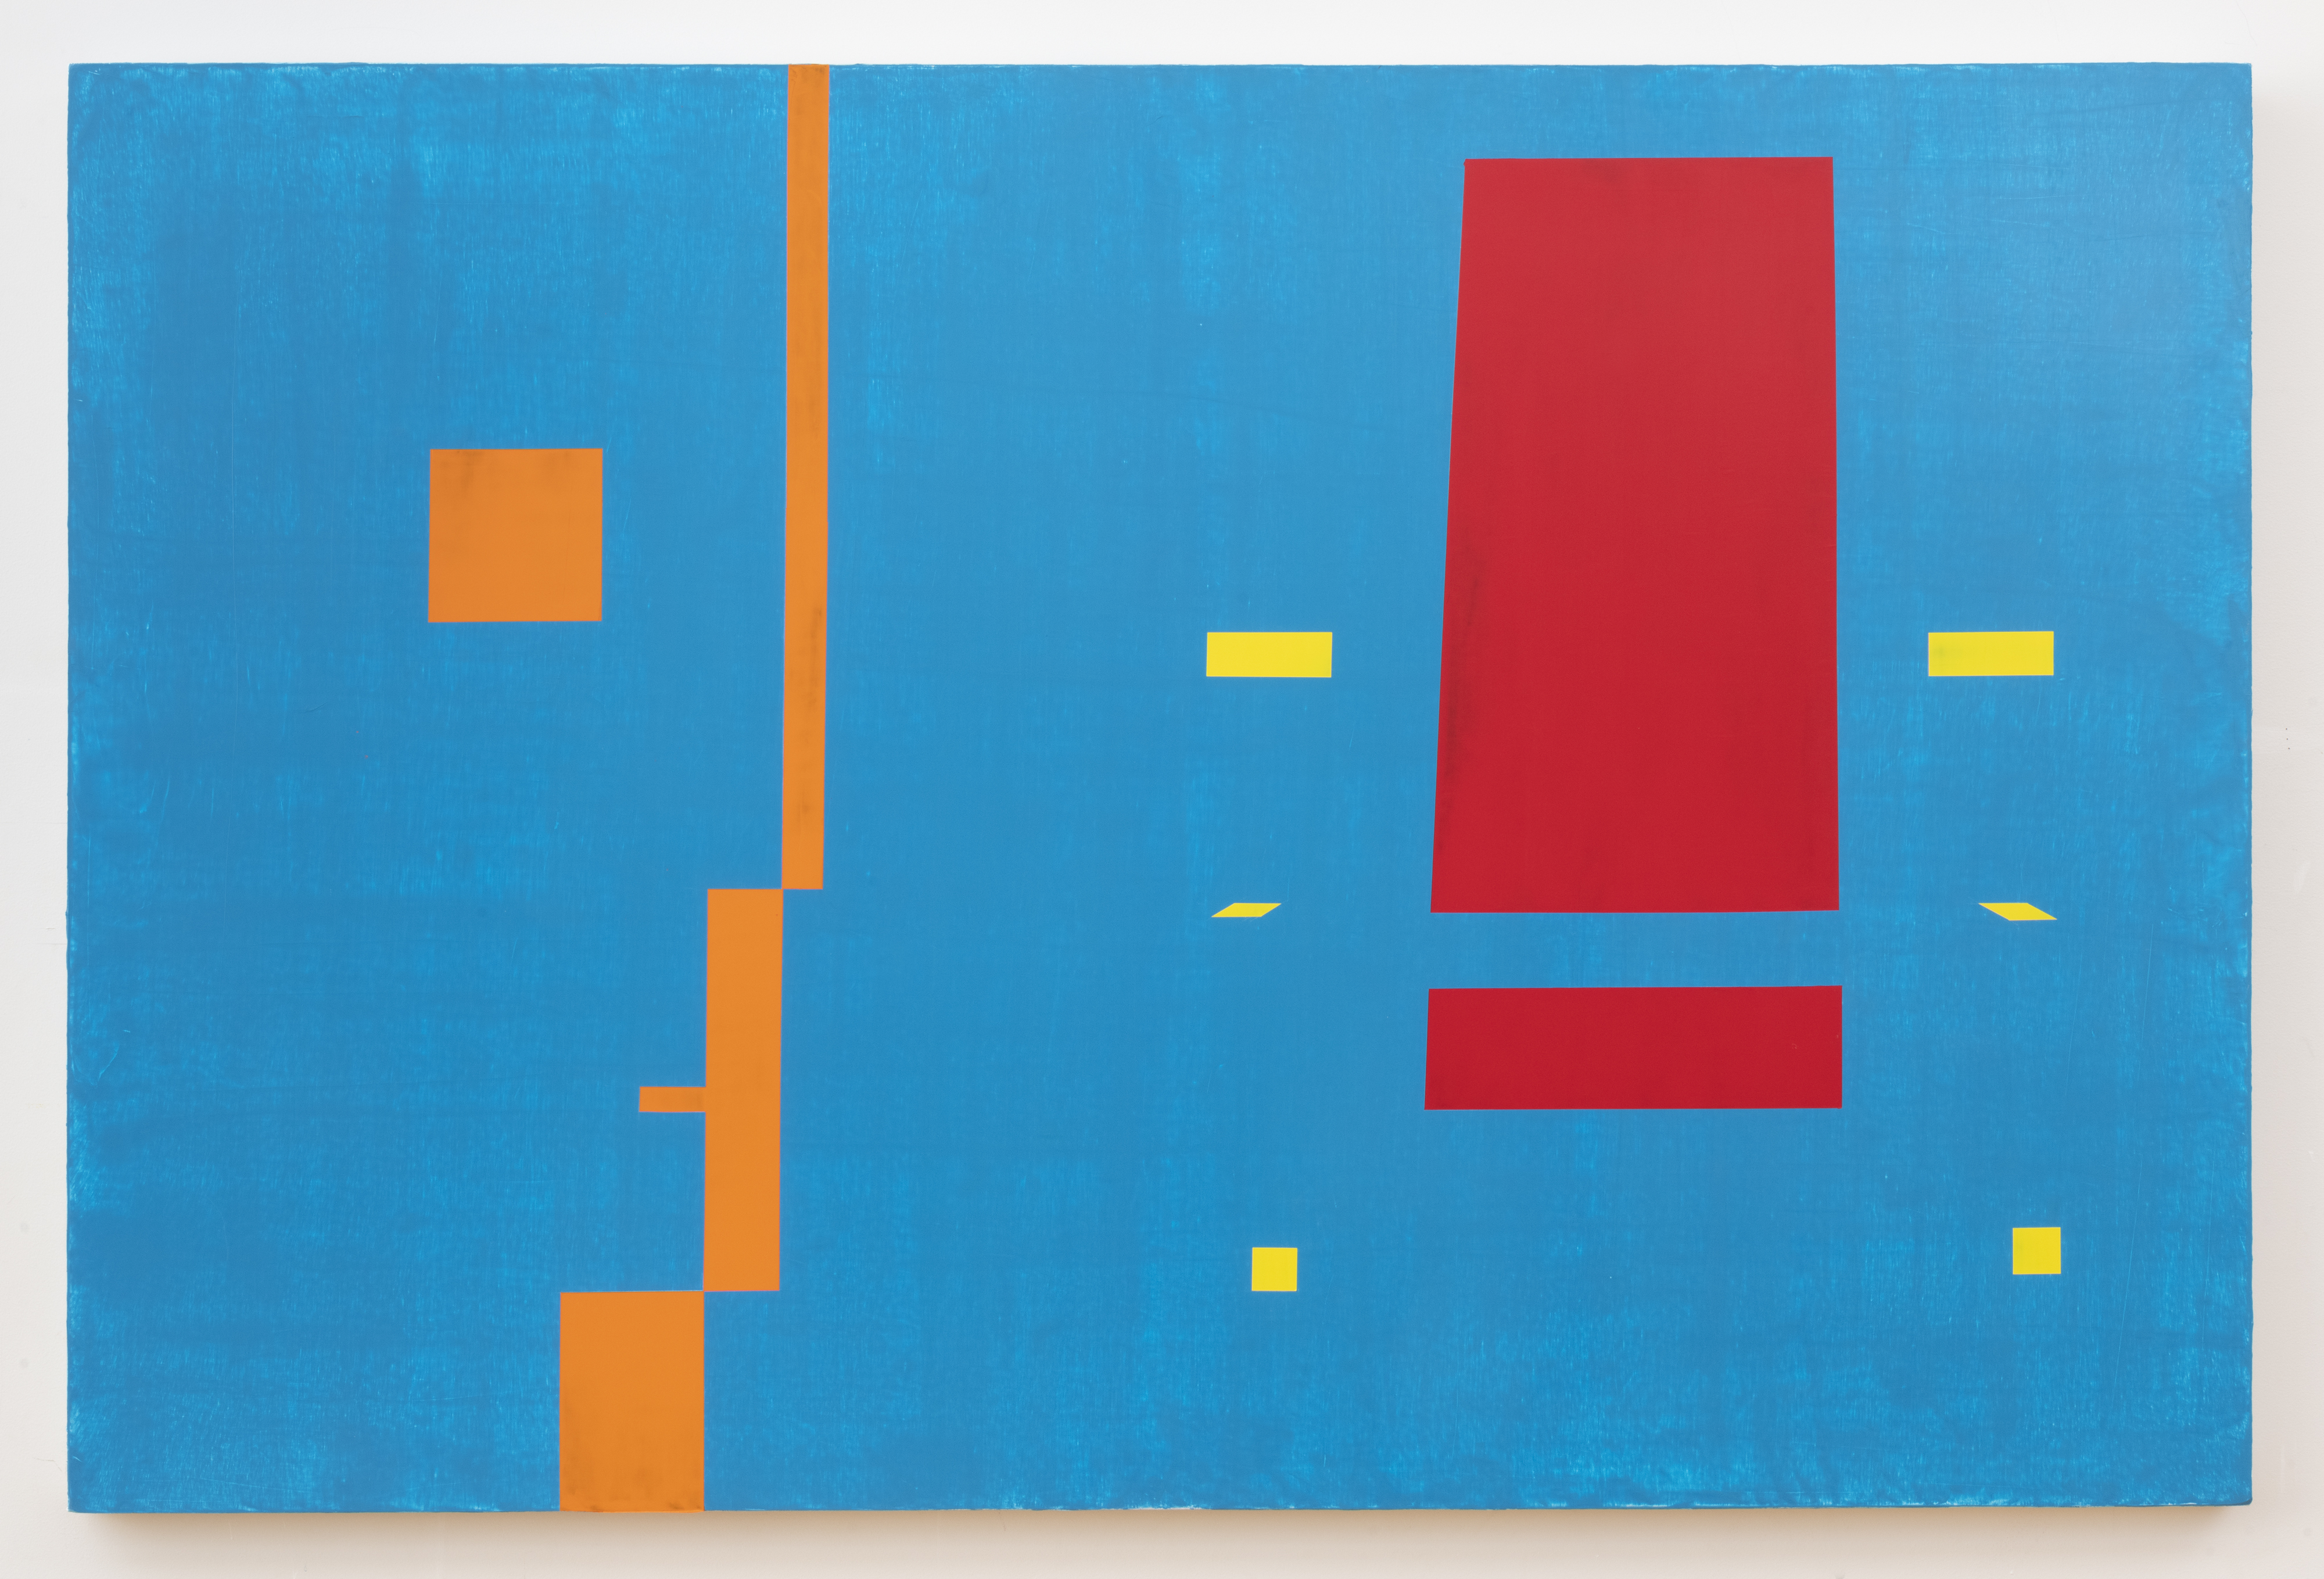 An abstract painting of blocks in red, orange and yellow against a blue background